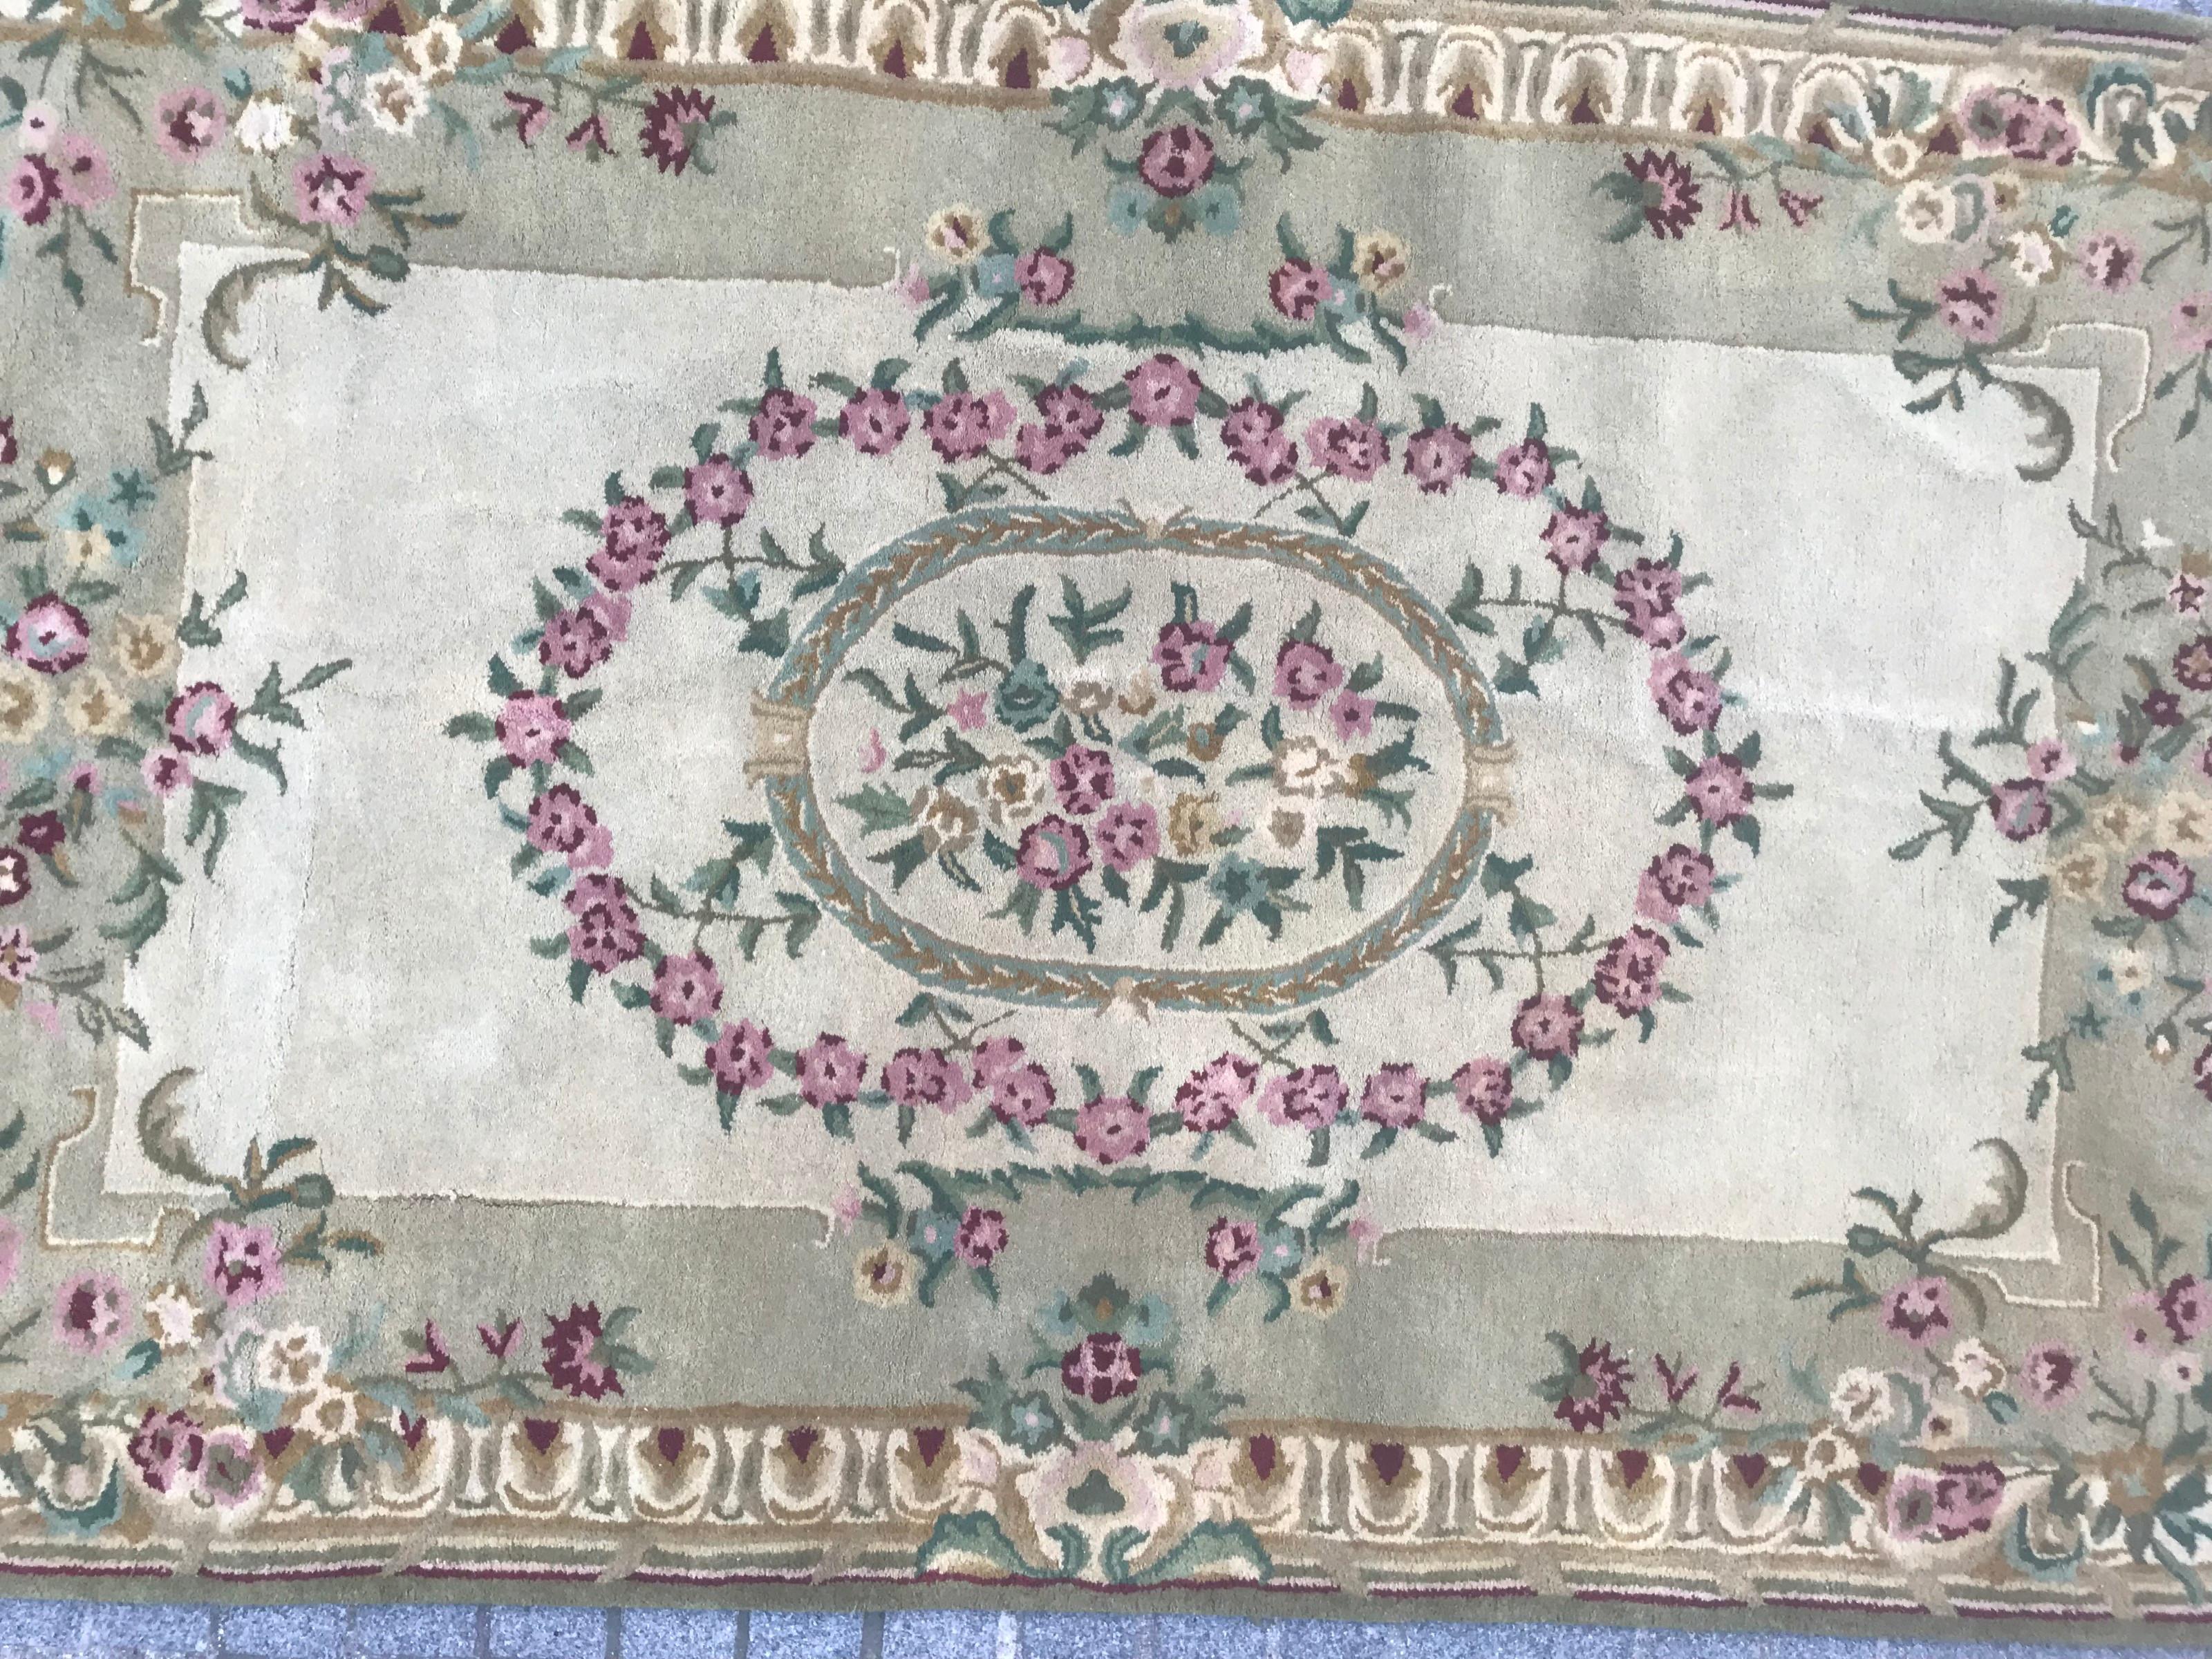 Nice hand tufted rug with a Savonnerie or Aubusson design
Wool velvet.

✨✨✨
